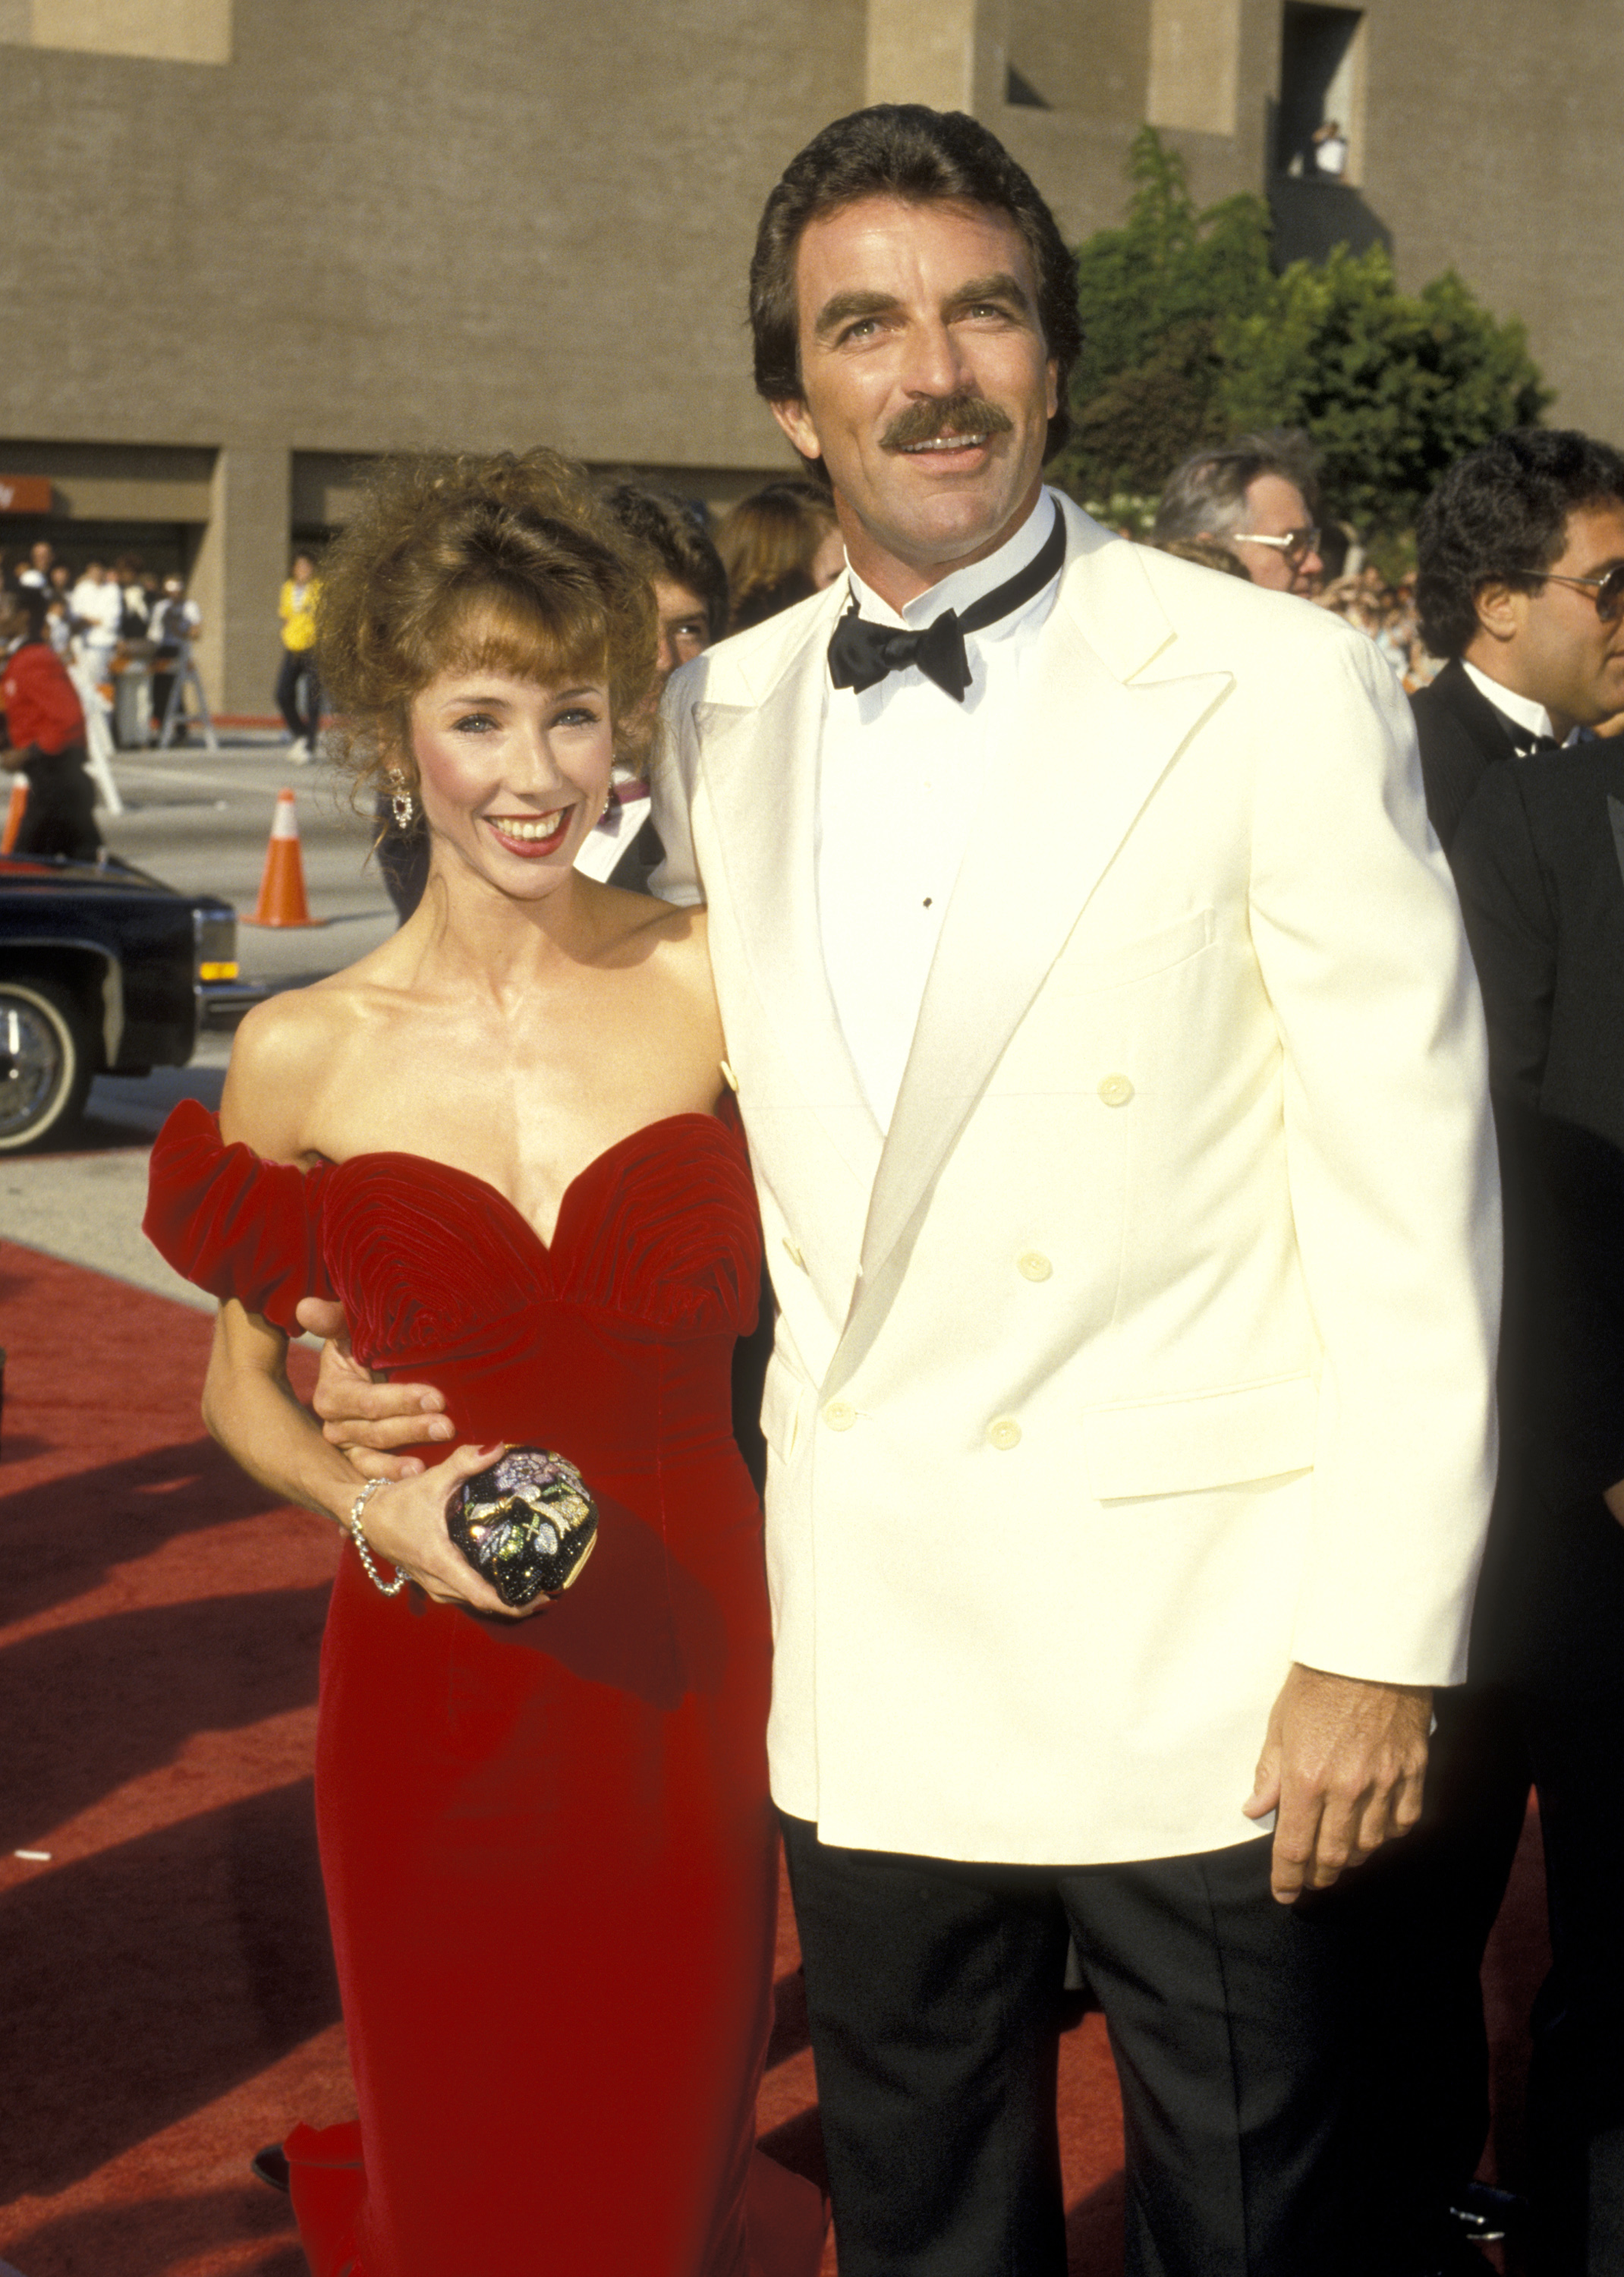 Jillie Joan Mack and Tom Selleck at the 38th Annual Primetime Emmy Awards in 1986 | Source: Getty Images